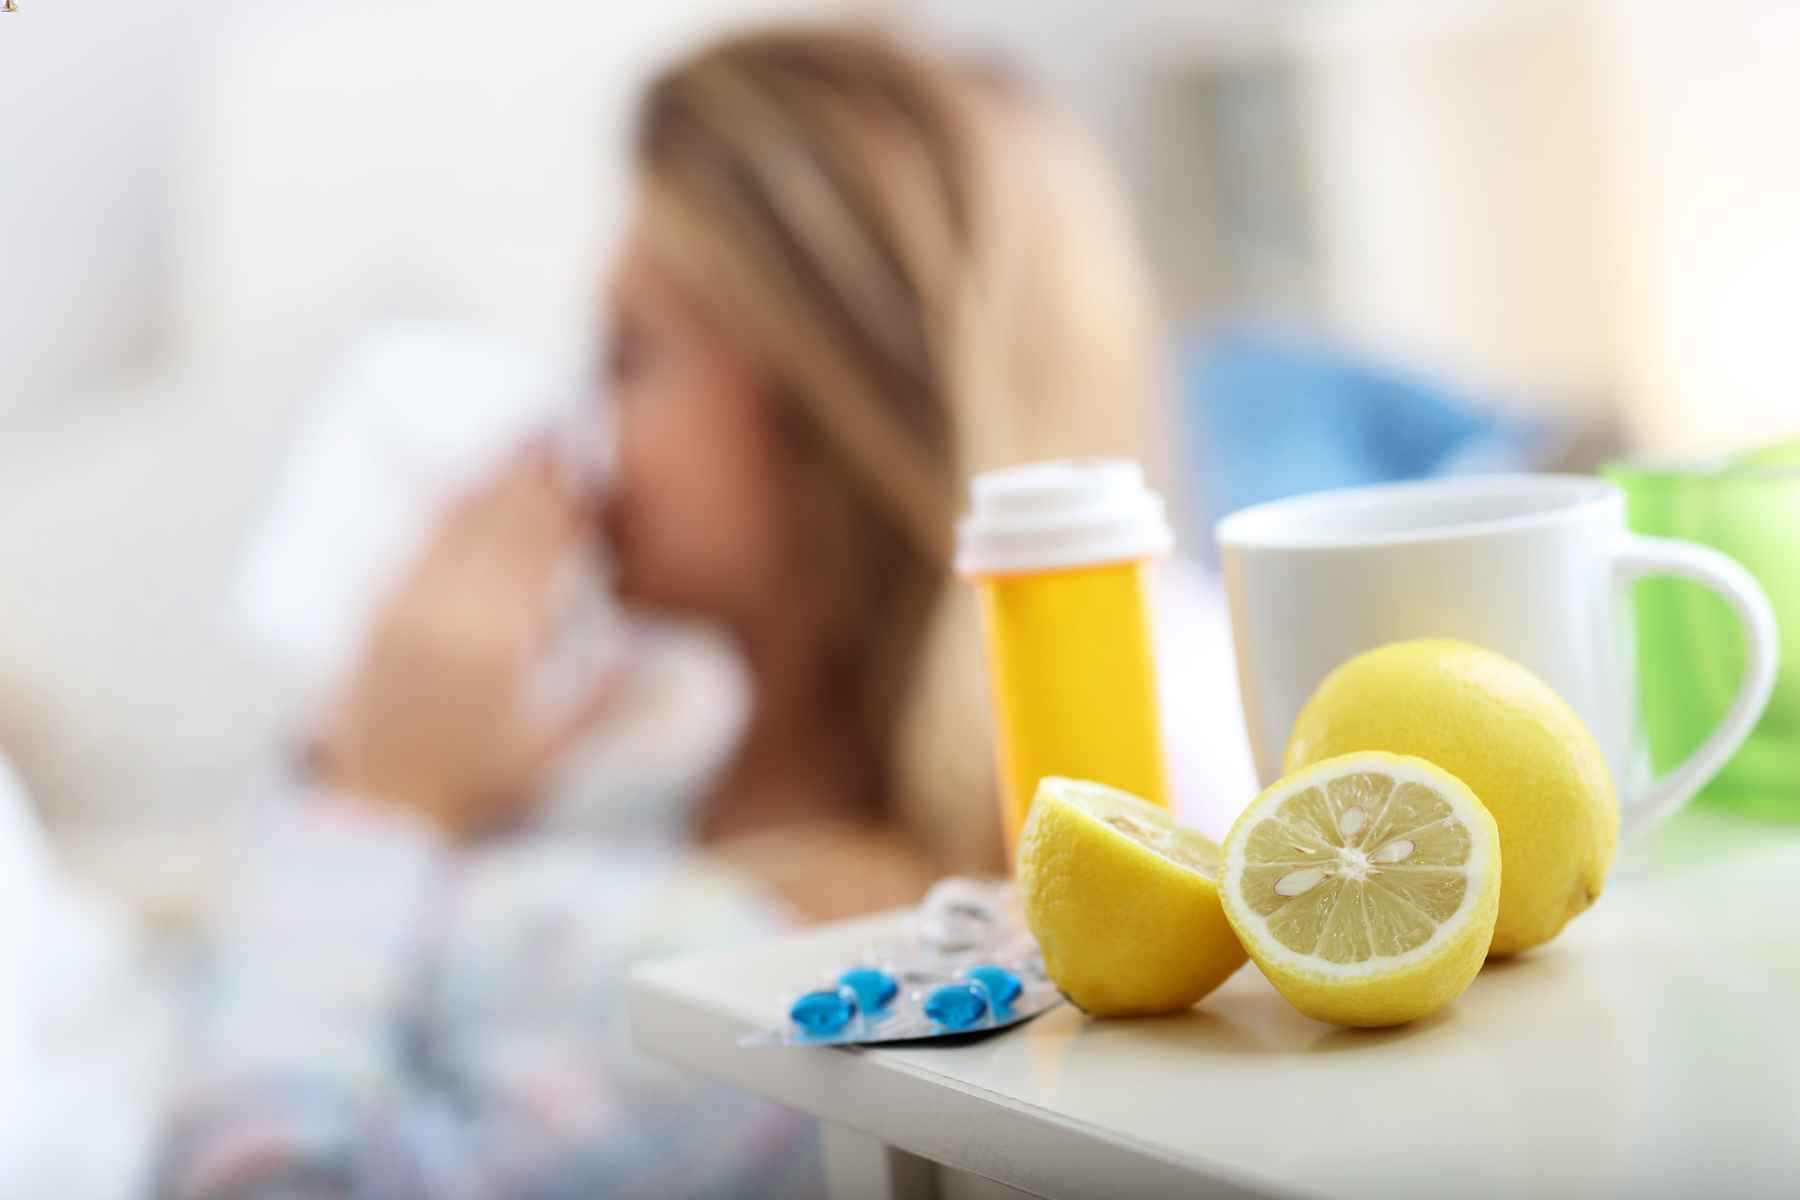 Out of focus woman in background blowing her nose, with cup of tea, lemons, and medication in focus in foreground.